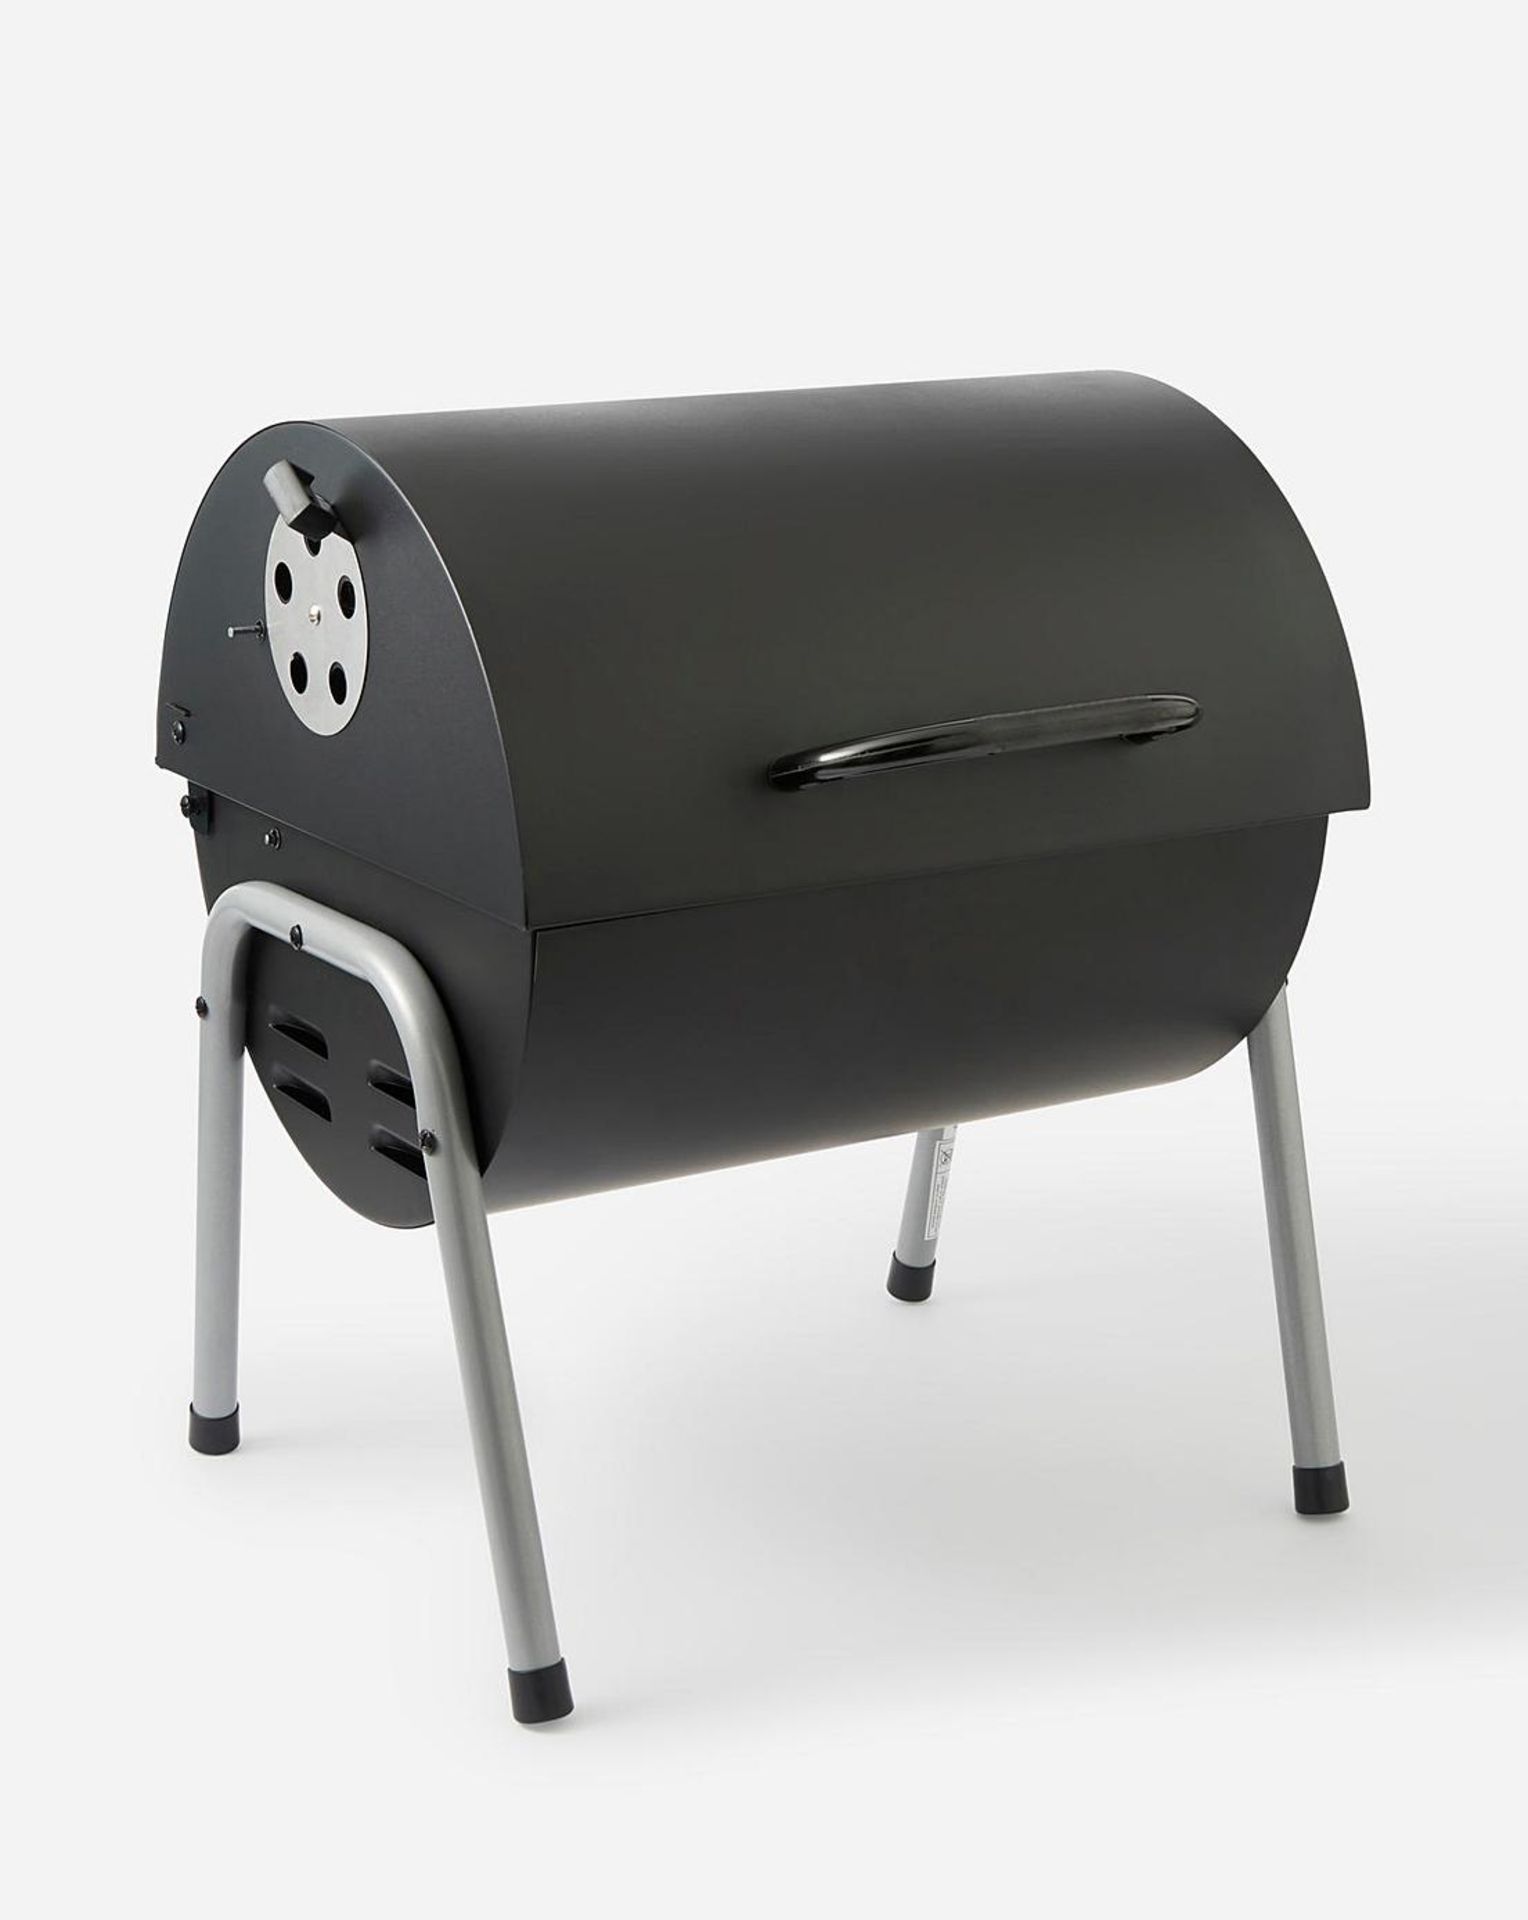 3x BRAND NEW Tabletop Oil Drum Barbeque Grill. RRP £59.99 EACH. Black steel firebowl with enamel - Image 3 of 4